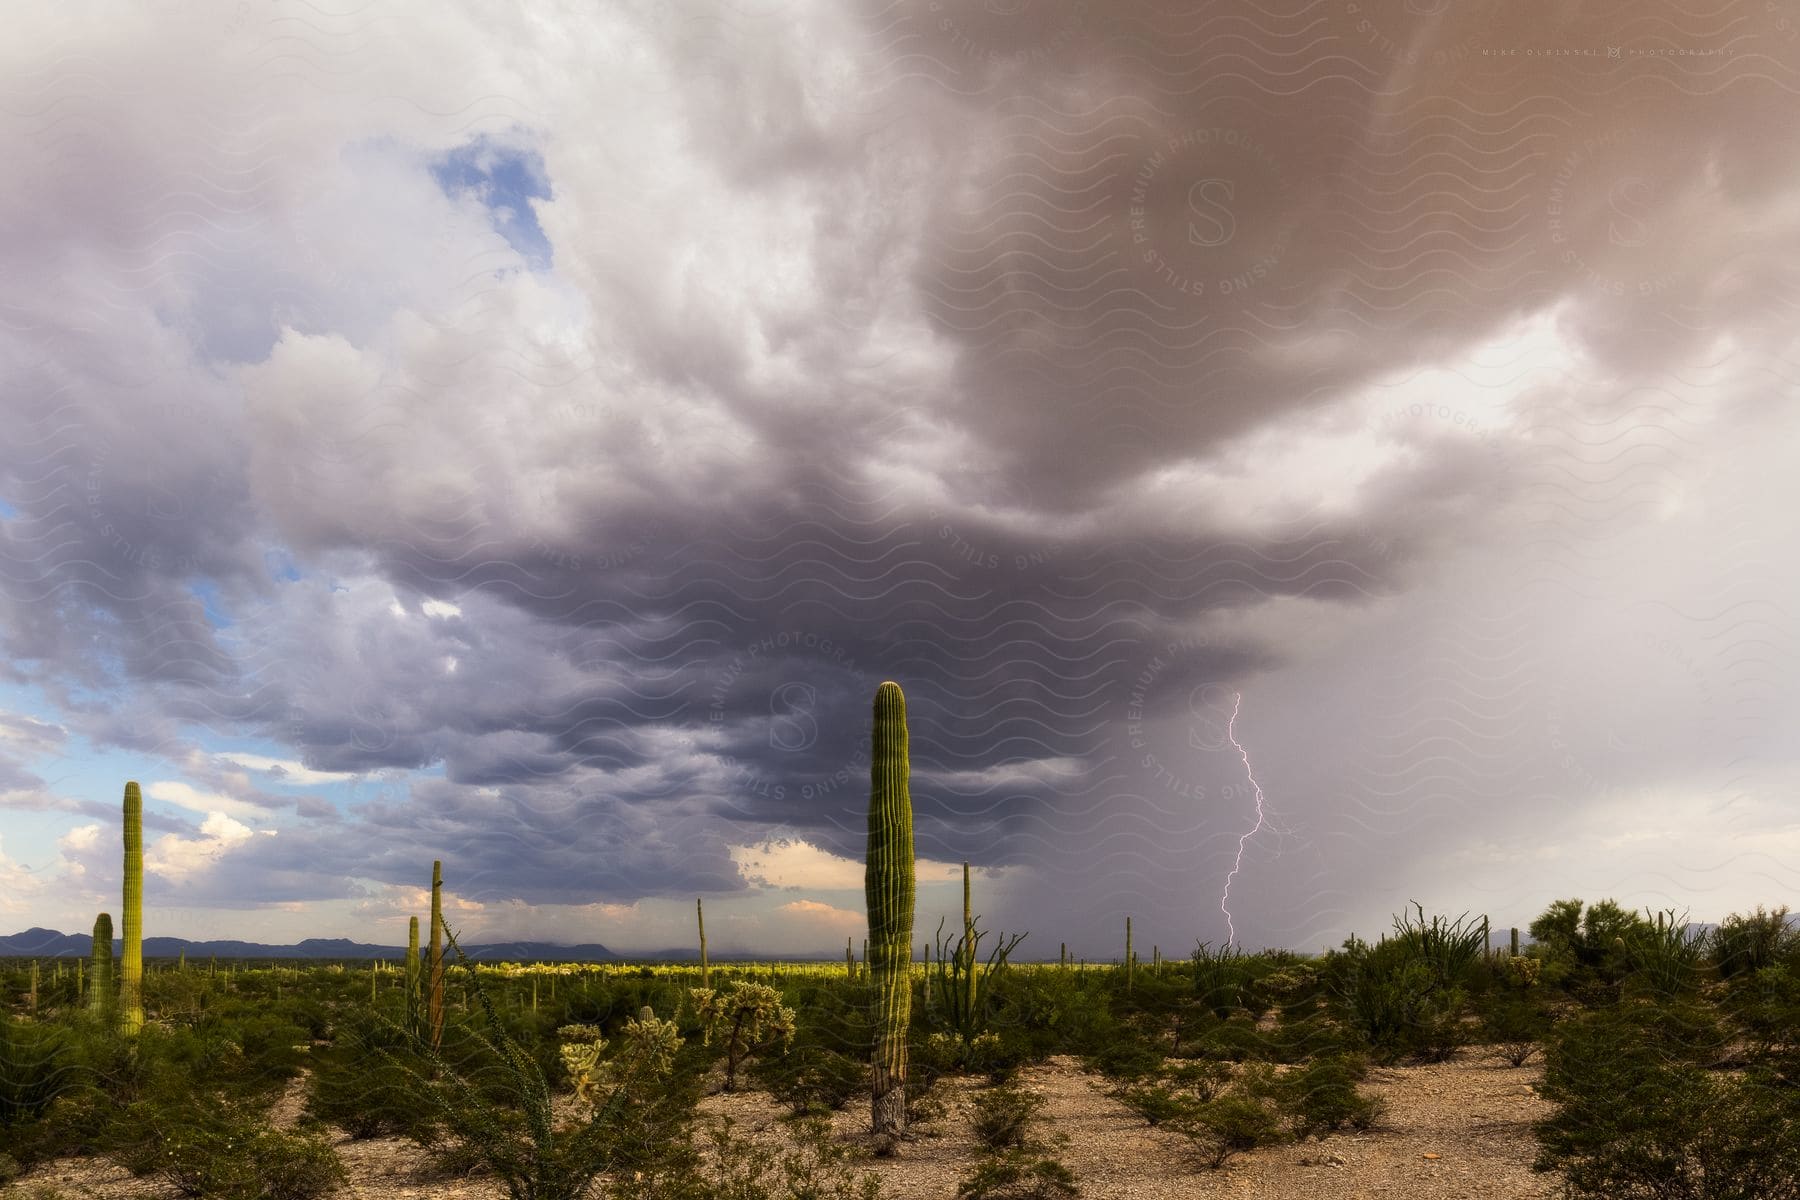 The desert landscape with cacti and storm clouds in the sky